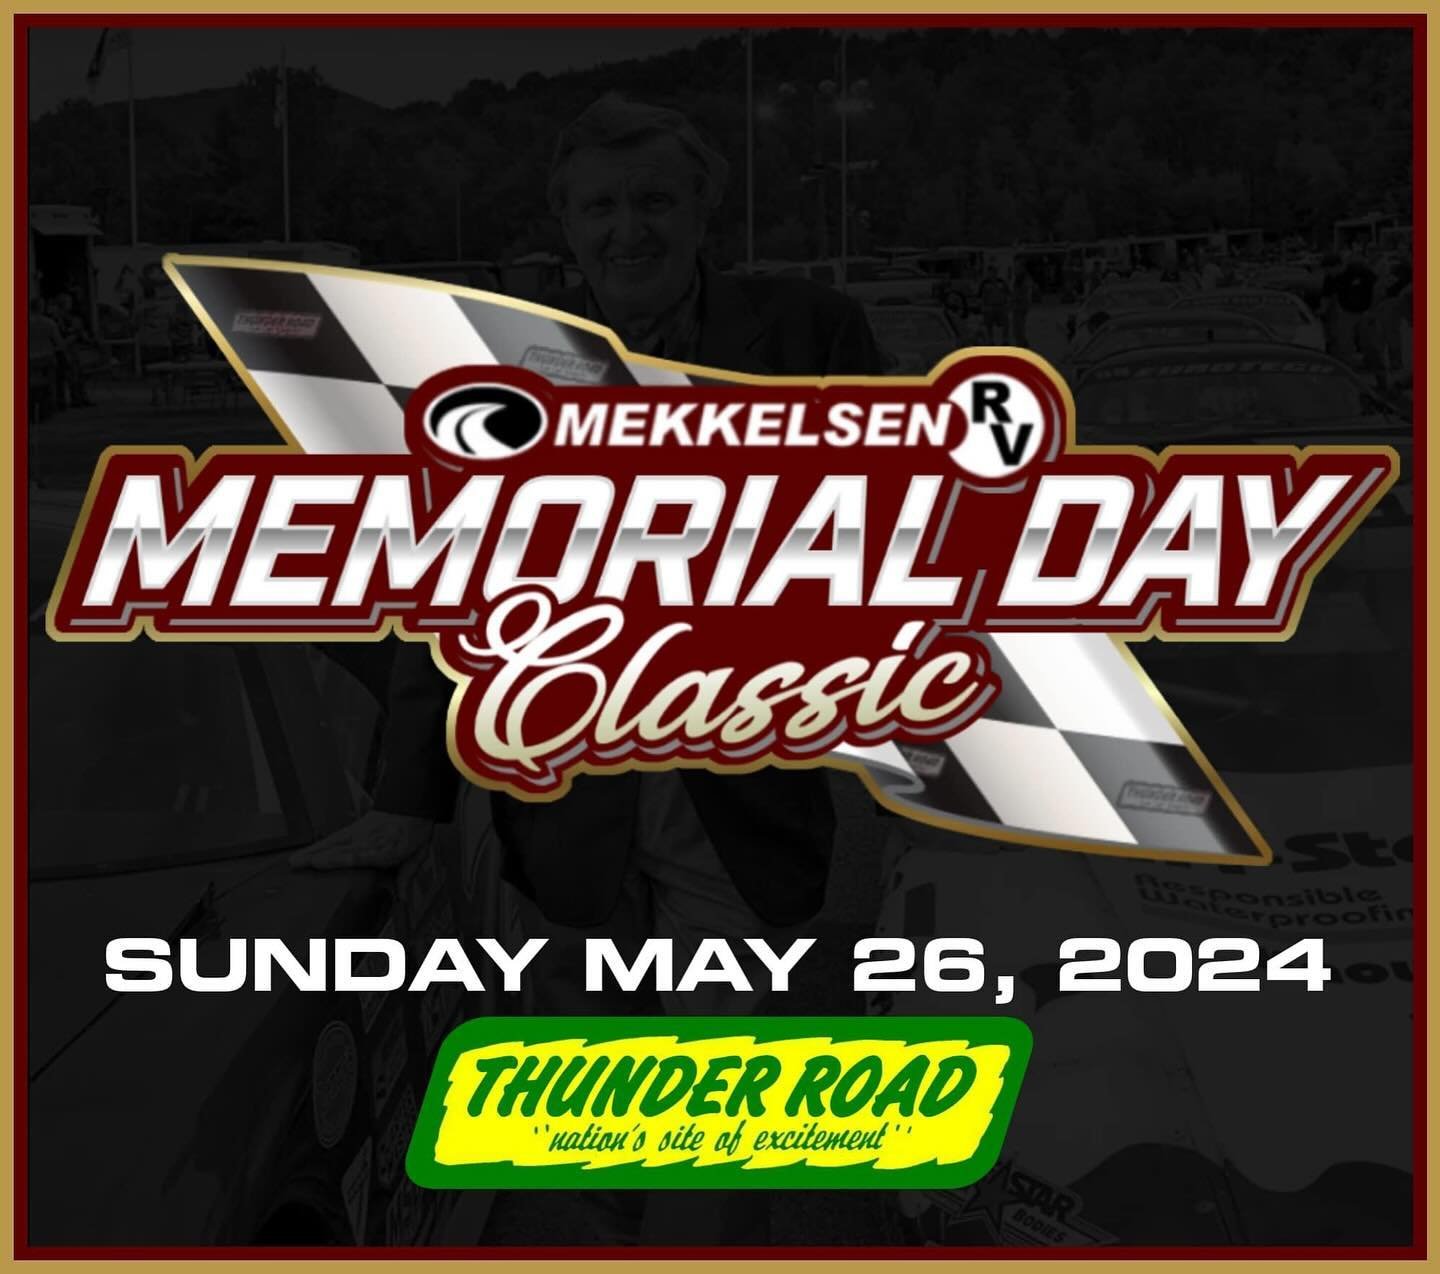 The 61st @mekkelsenrv Memorial Day Classic on Sunday May 26th is already a major event on our schedule, and 2024 will be no exception.

While we are not going to spoil it right now, just know that we do have one more special tribute in store for Thun